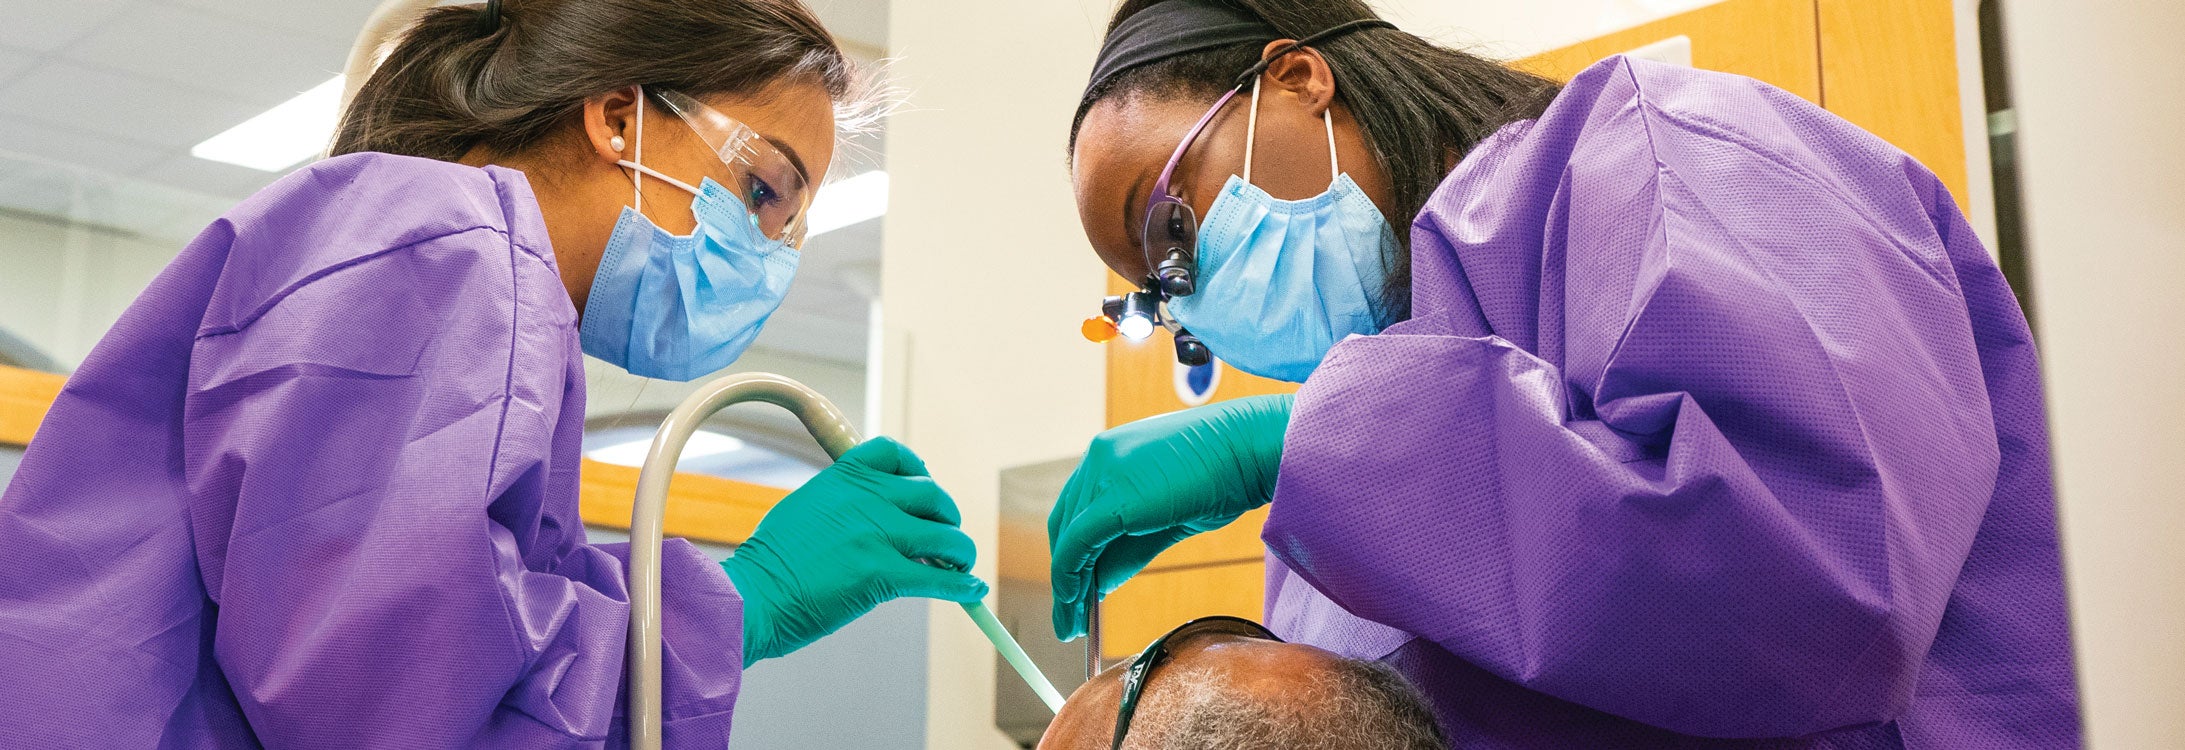 Fourth-year dental students Laura Mercer and Jasmine Schneider work on a patient’s teeth at the Elizabeth City community service learning center.